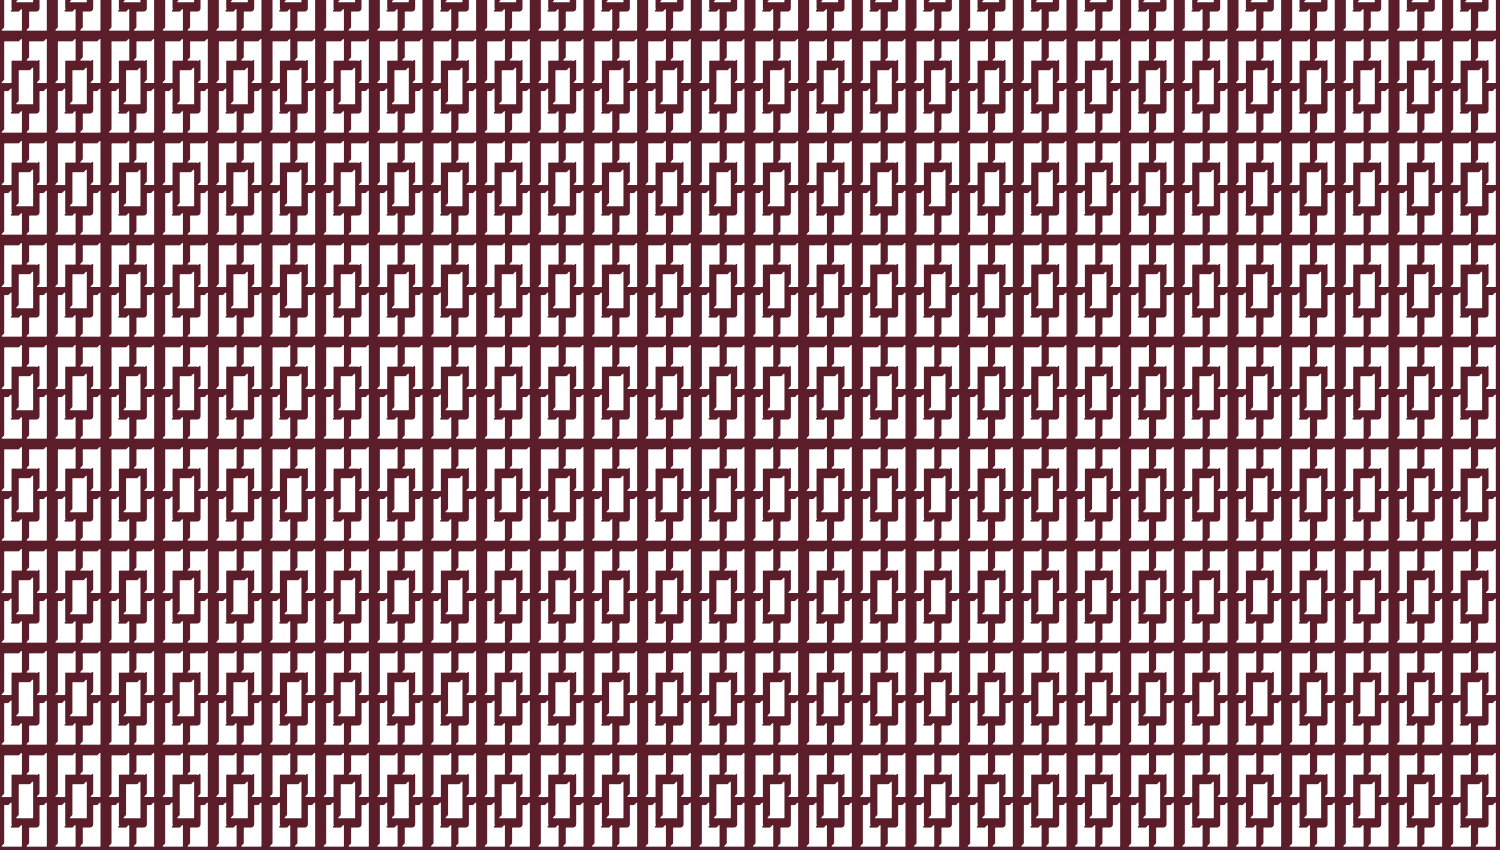 Parasoleil™ Cranbrook© pattern displayed with a burgundy color overlay